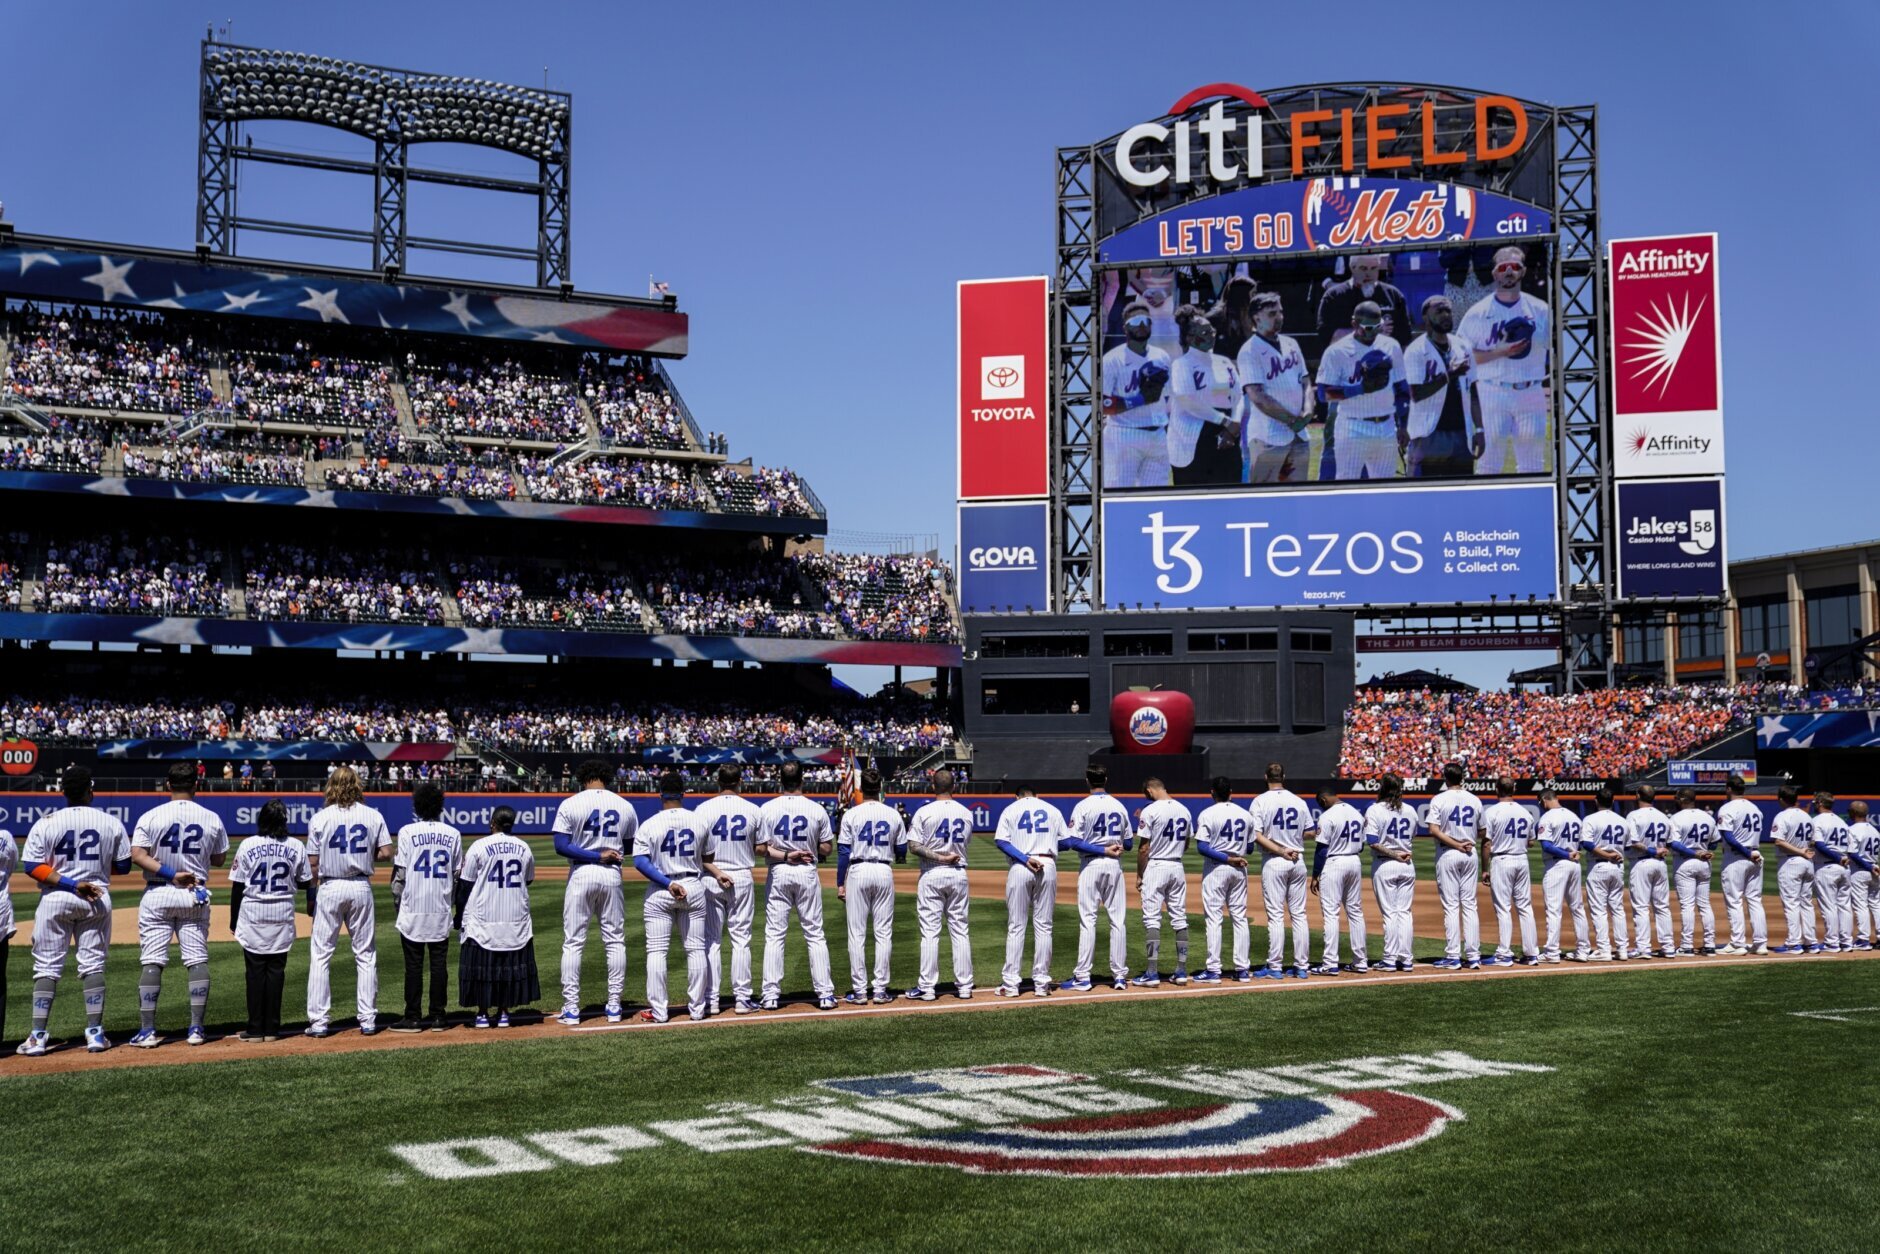 New York Mets ensure Jackie Robinson will never be forgotten, US sports